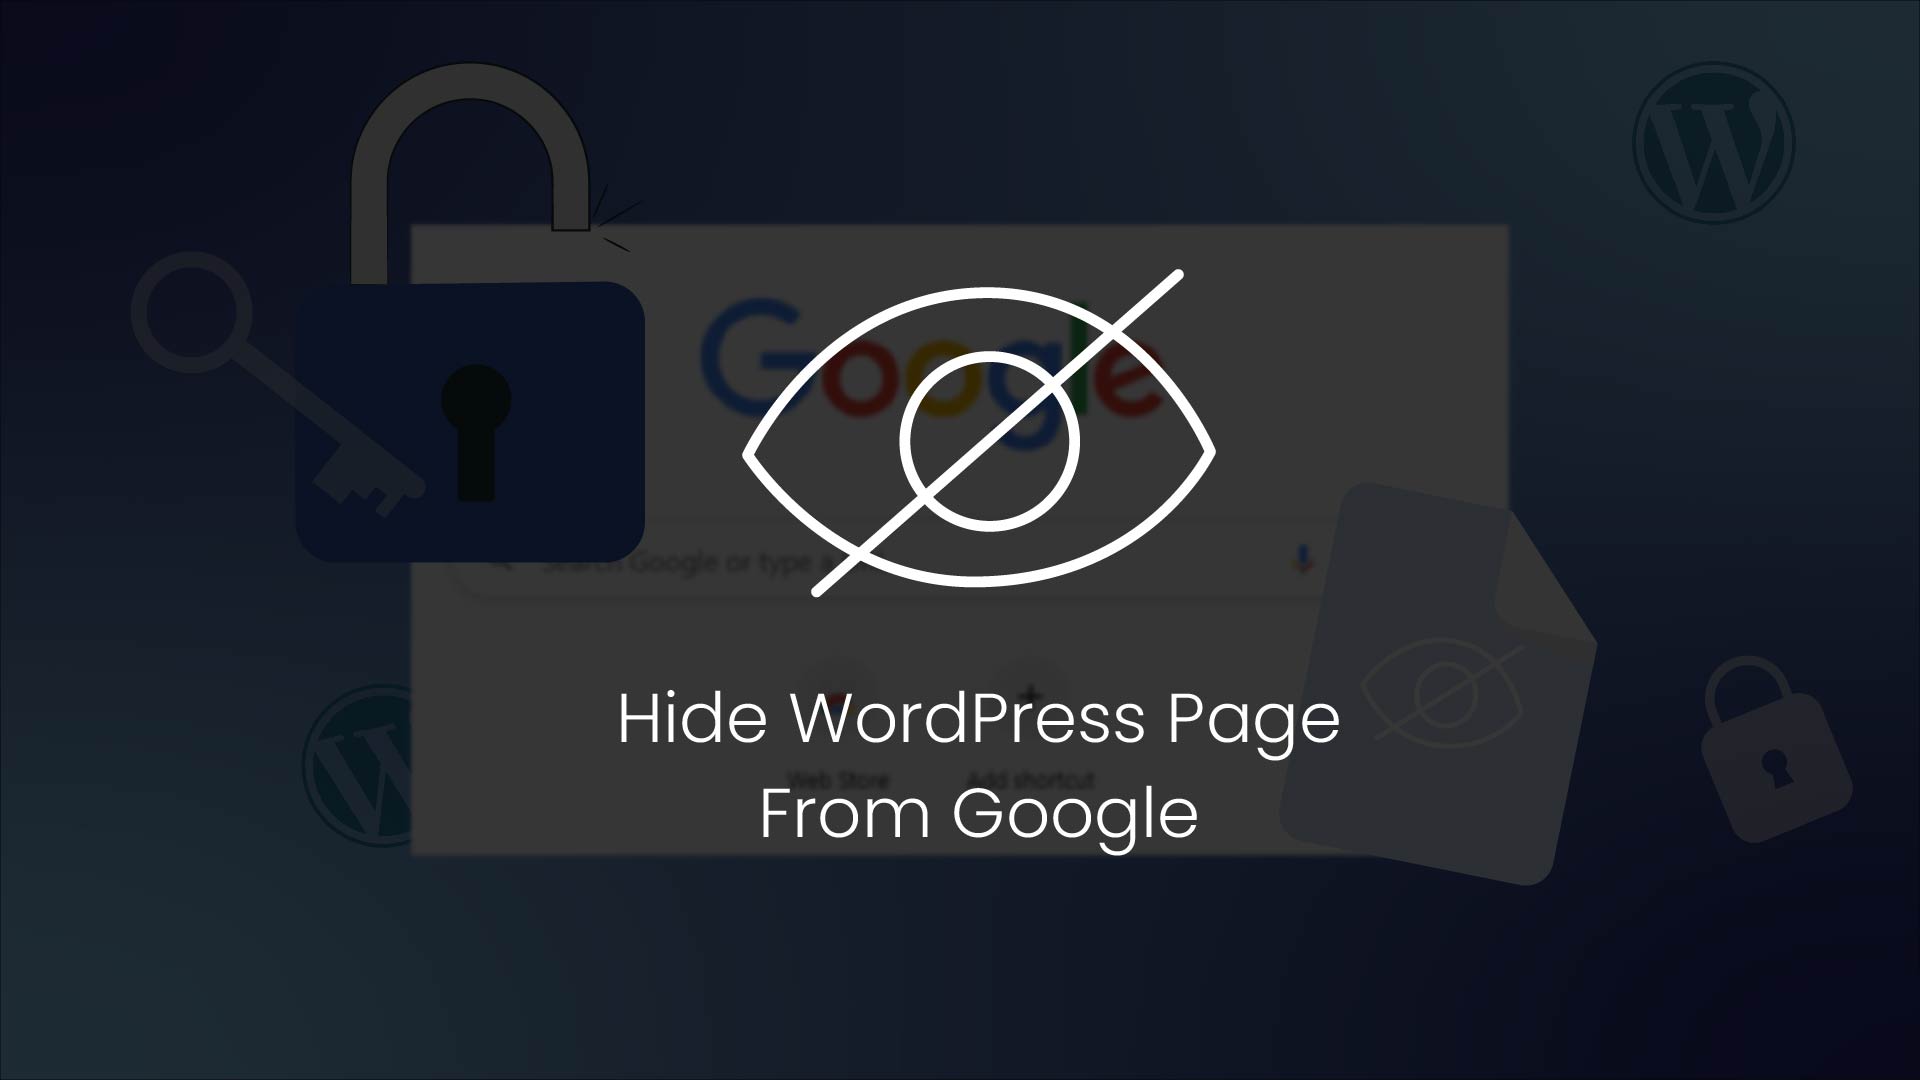 Hide WordPress Page From Google